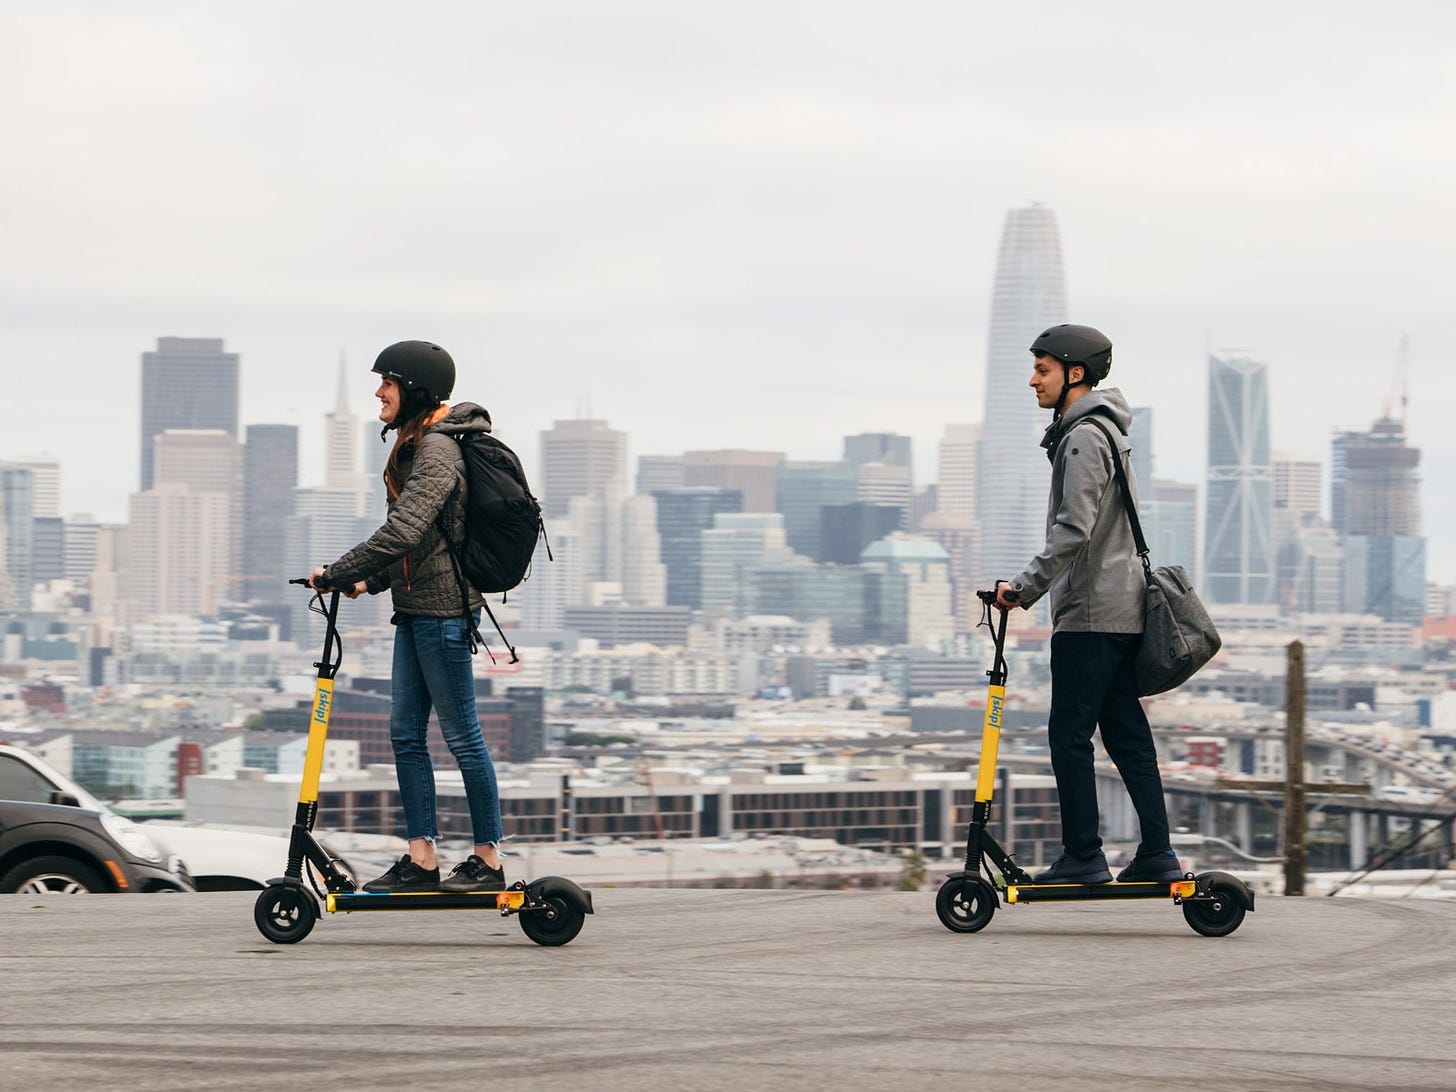 San Francisco officials have authorized Skip along with Scoot to operate shared escooters in the city. Each company can...